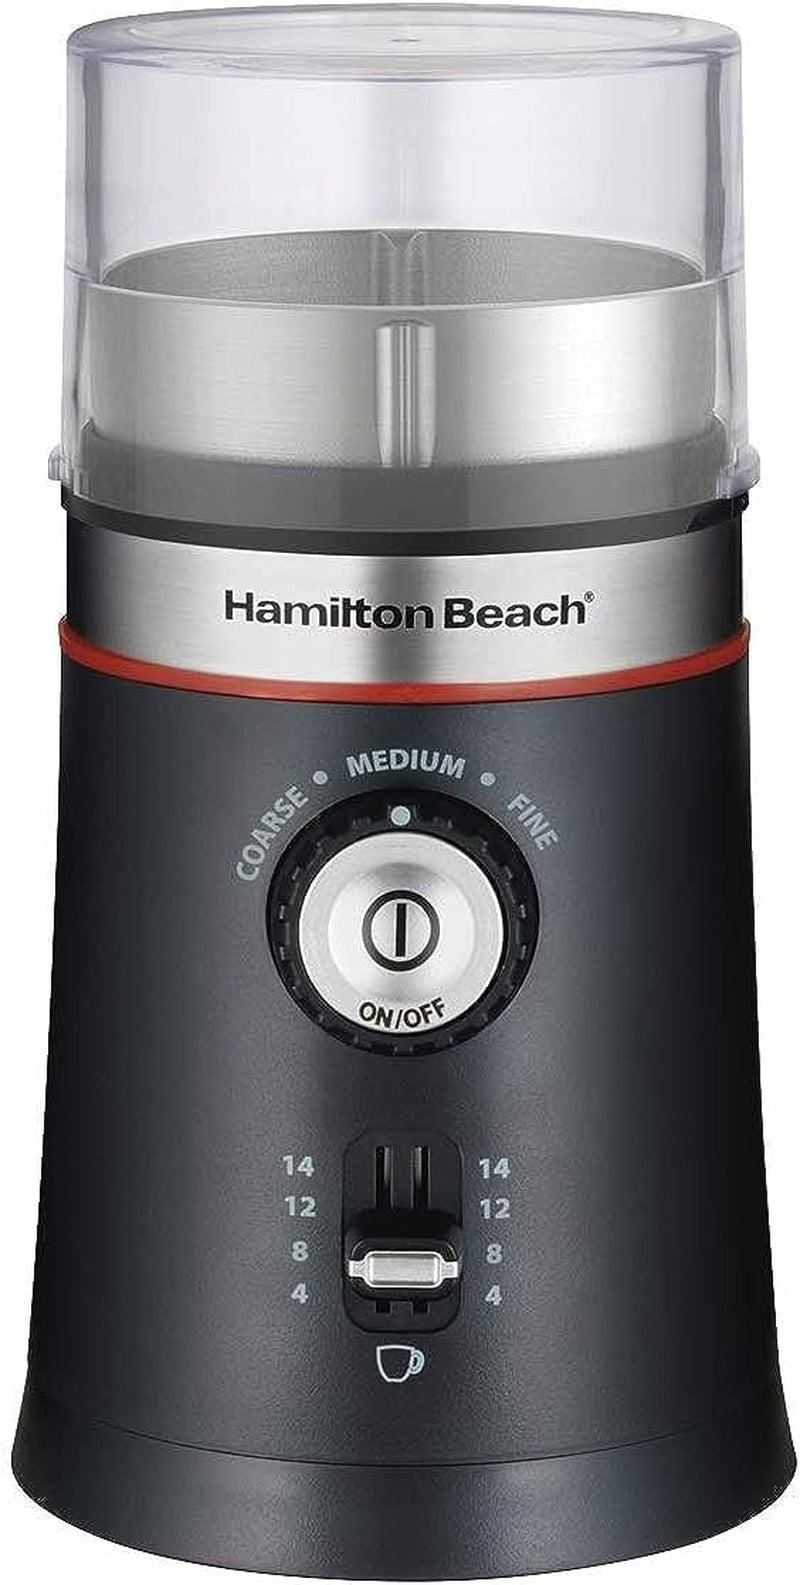 Hamilton Beach Electric Coffee Grinder for Beans, Spices and More, with Multiple Grind Settings for up to 14 Cups, Removable Stainless Steel Chamber, Grey (80396C), 10 oz